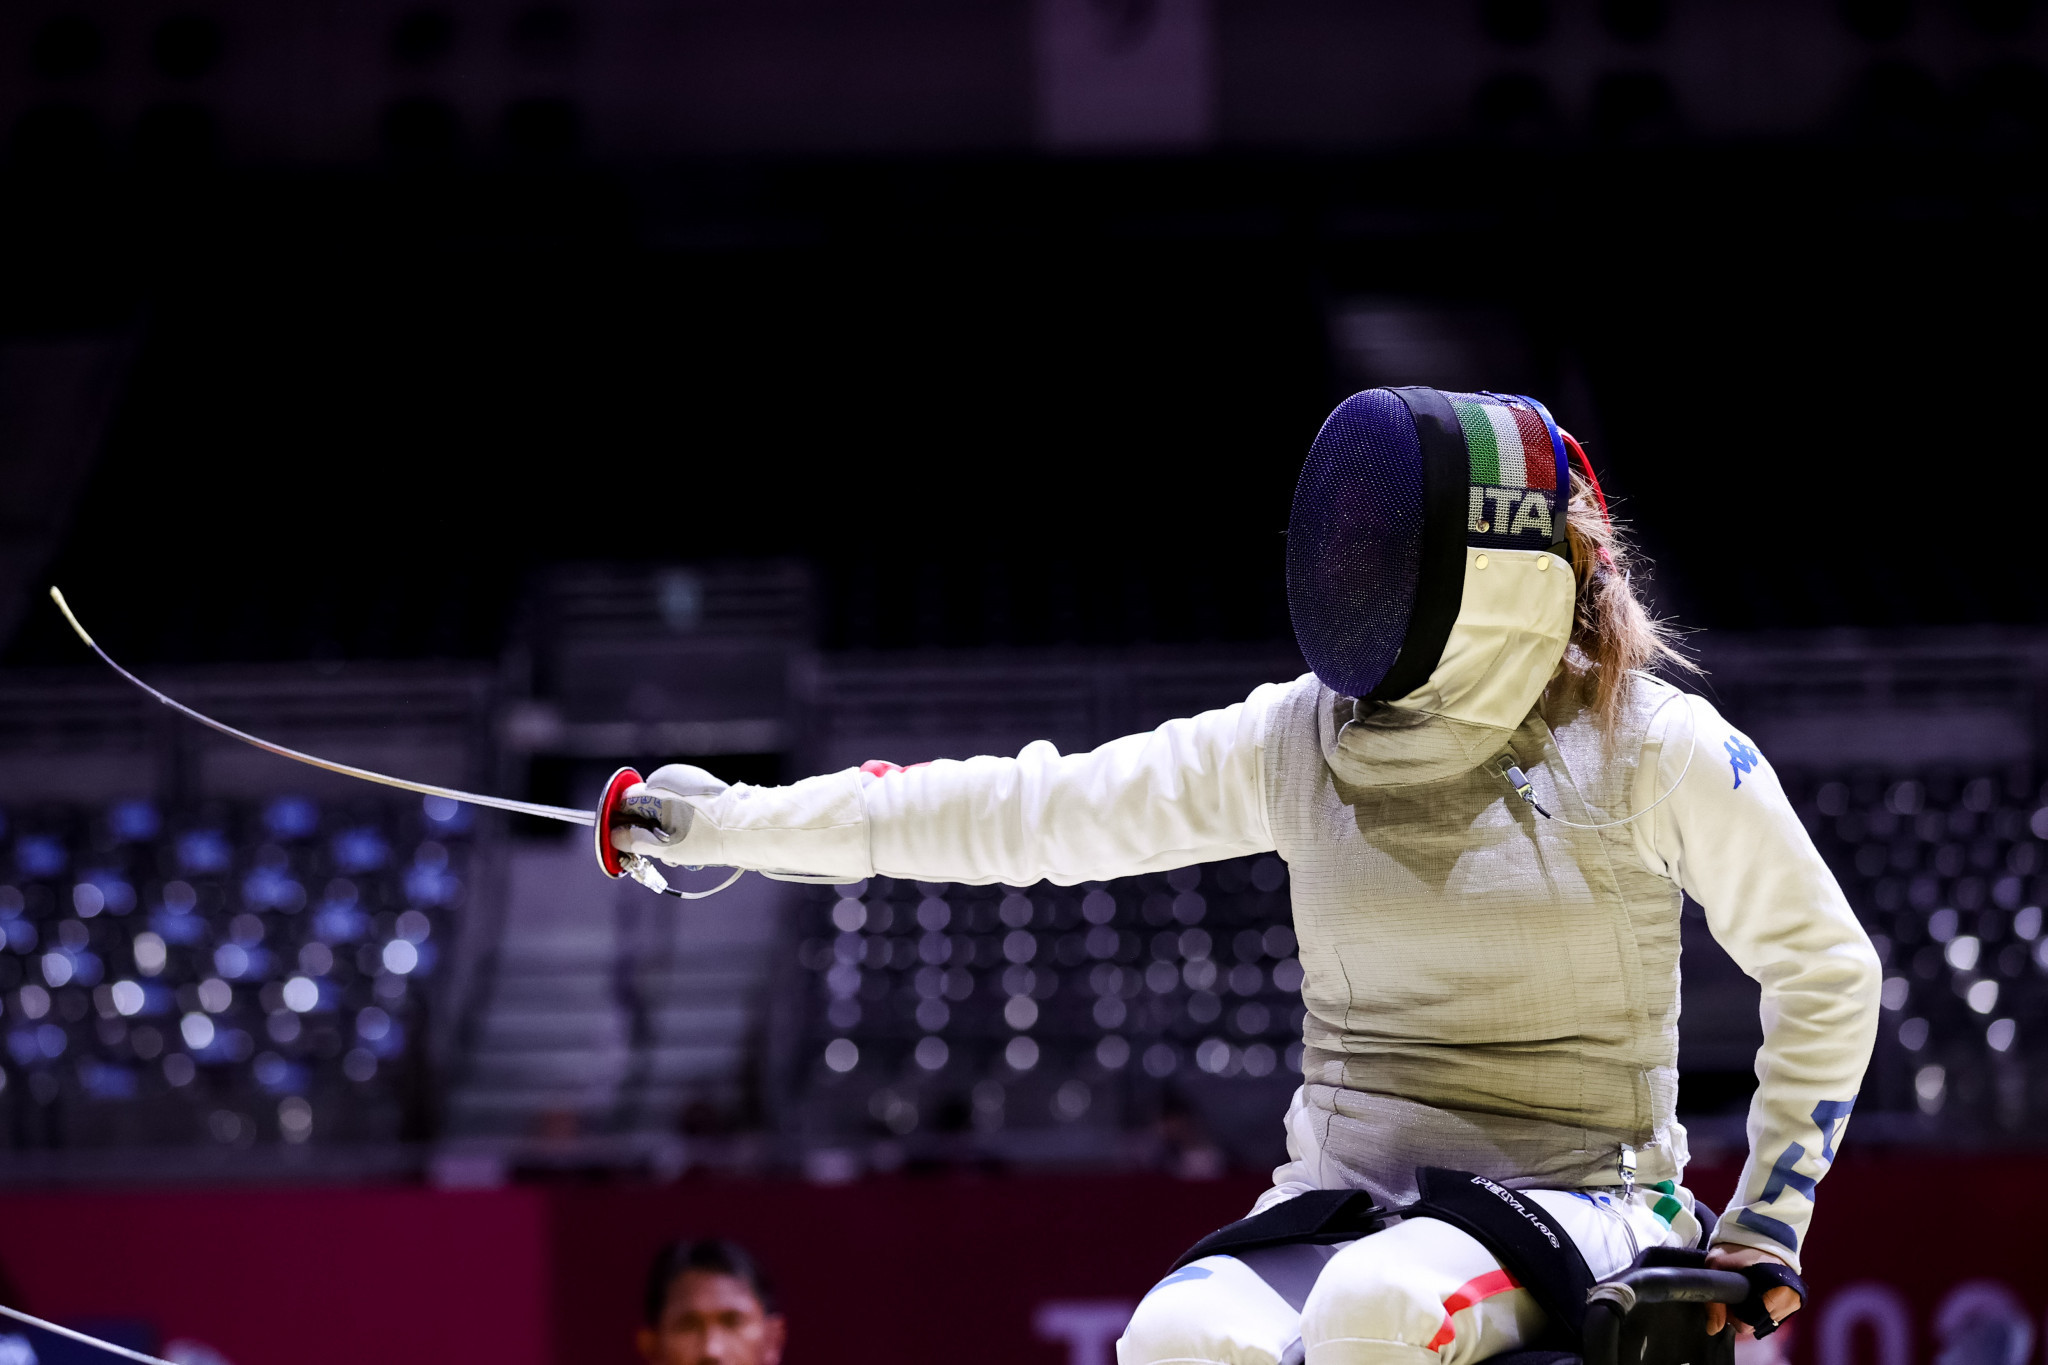 Loredana Trigilia played a key role in Italy's victory in the women's foil senior team category ©Getty Images